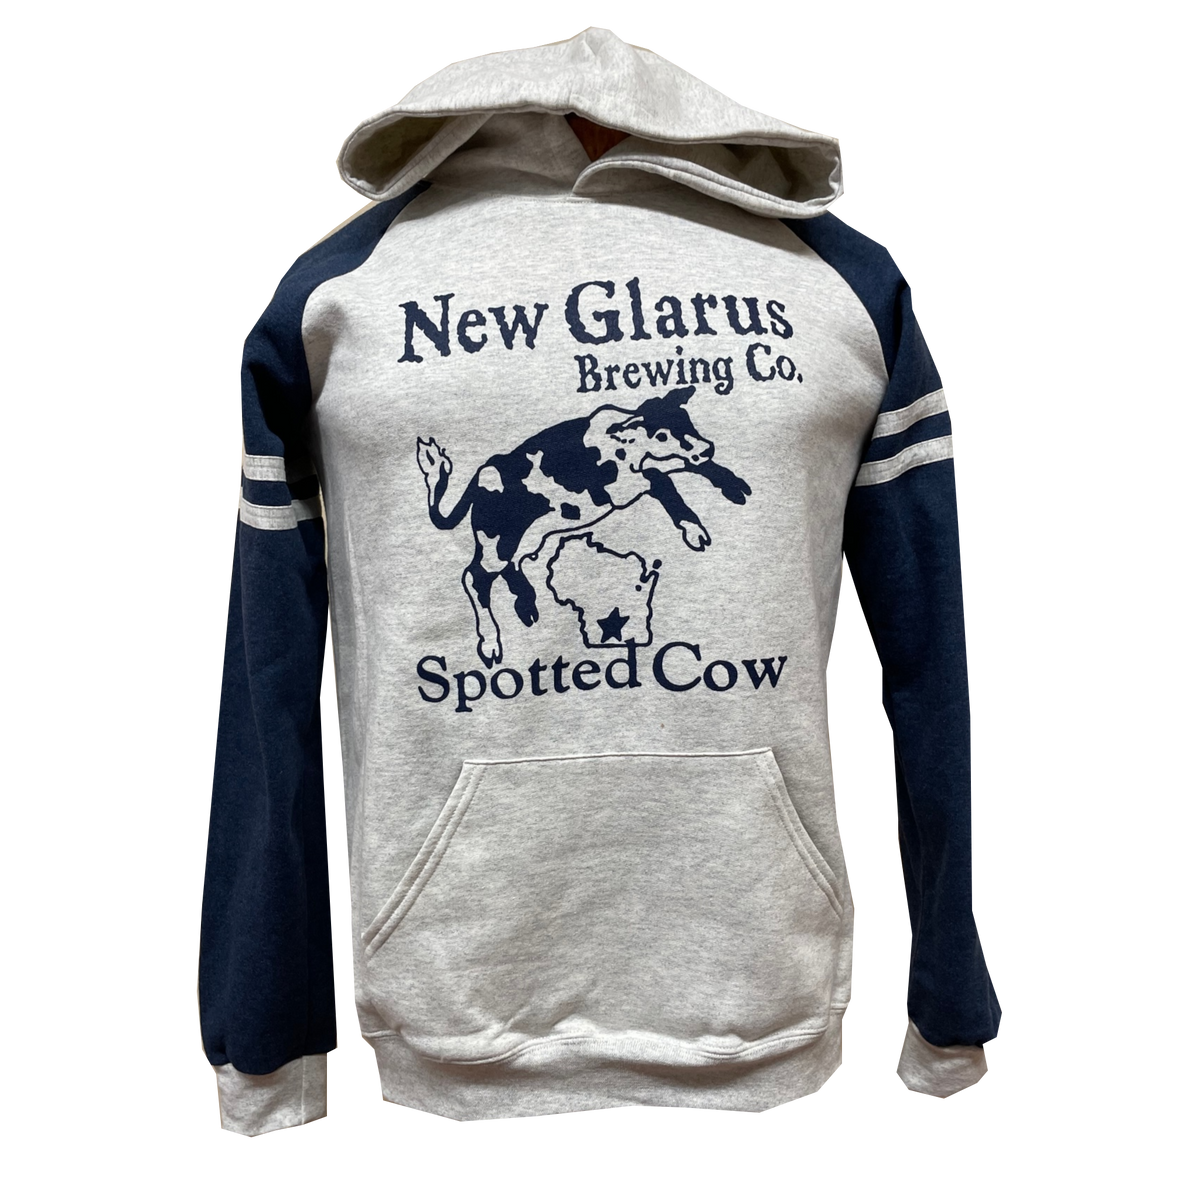 Light gery hooded sweatshirt with Navy blue raglan sleeves with two grey stripes around each sleeve. Features the Spotted Cow logo in navy blue on the front.